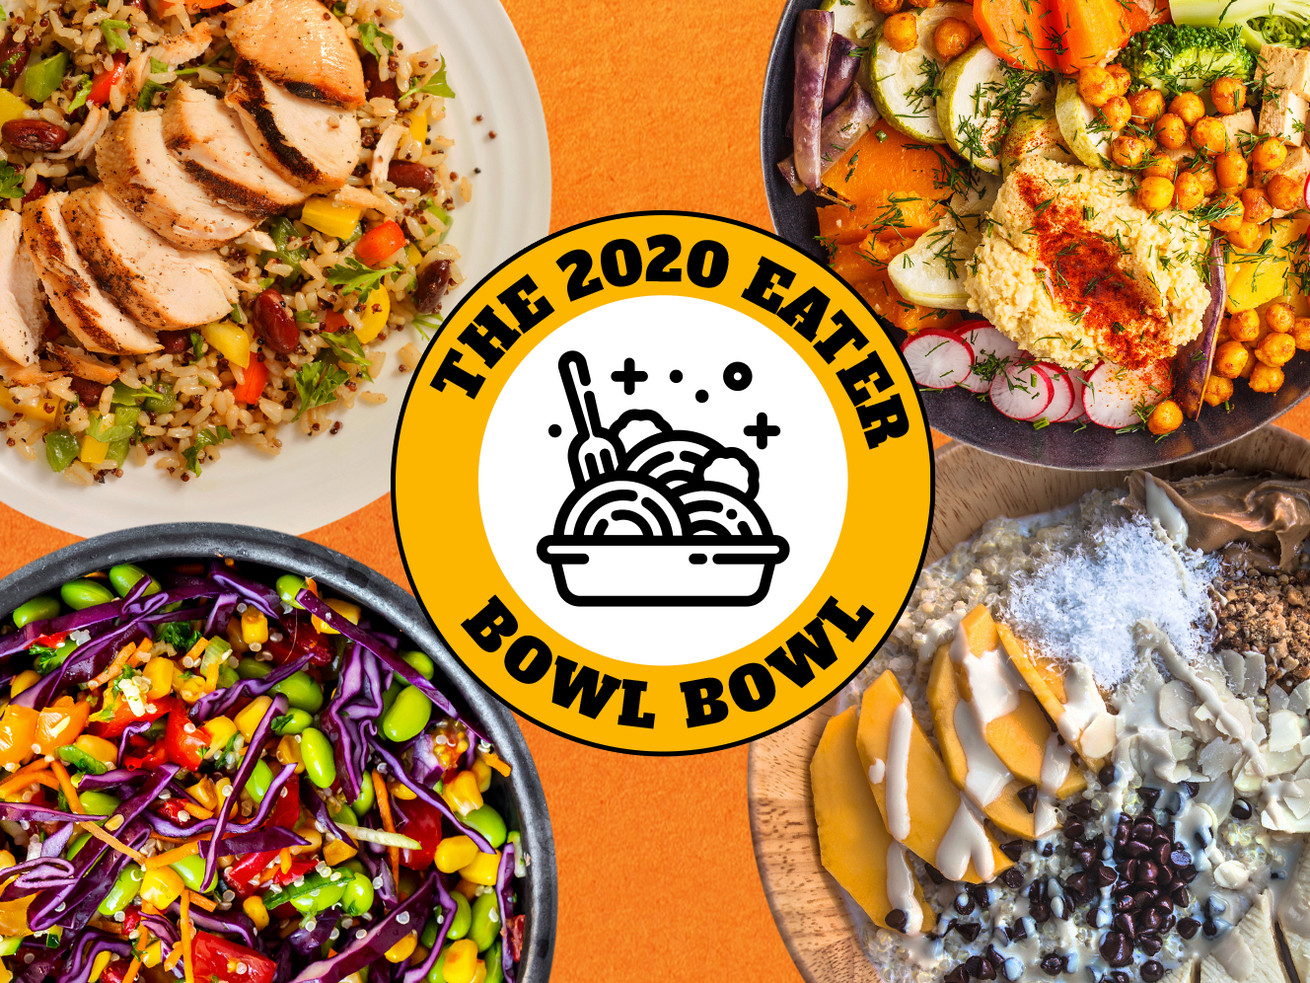 From above: a chicken and rice bowl, a Mediterranean bowl with chickpeas and hummus, a smoothie bowl with mango slices and coconut, and a colorful veggie bowl with beans and purple cabbage, circled around a badge reading “The 2020 Eater Bowl Bowl” with a black and white bowl drawing in the center.